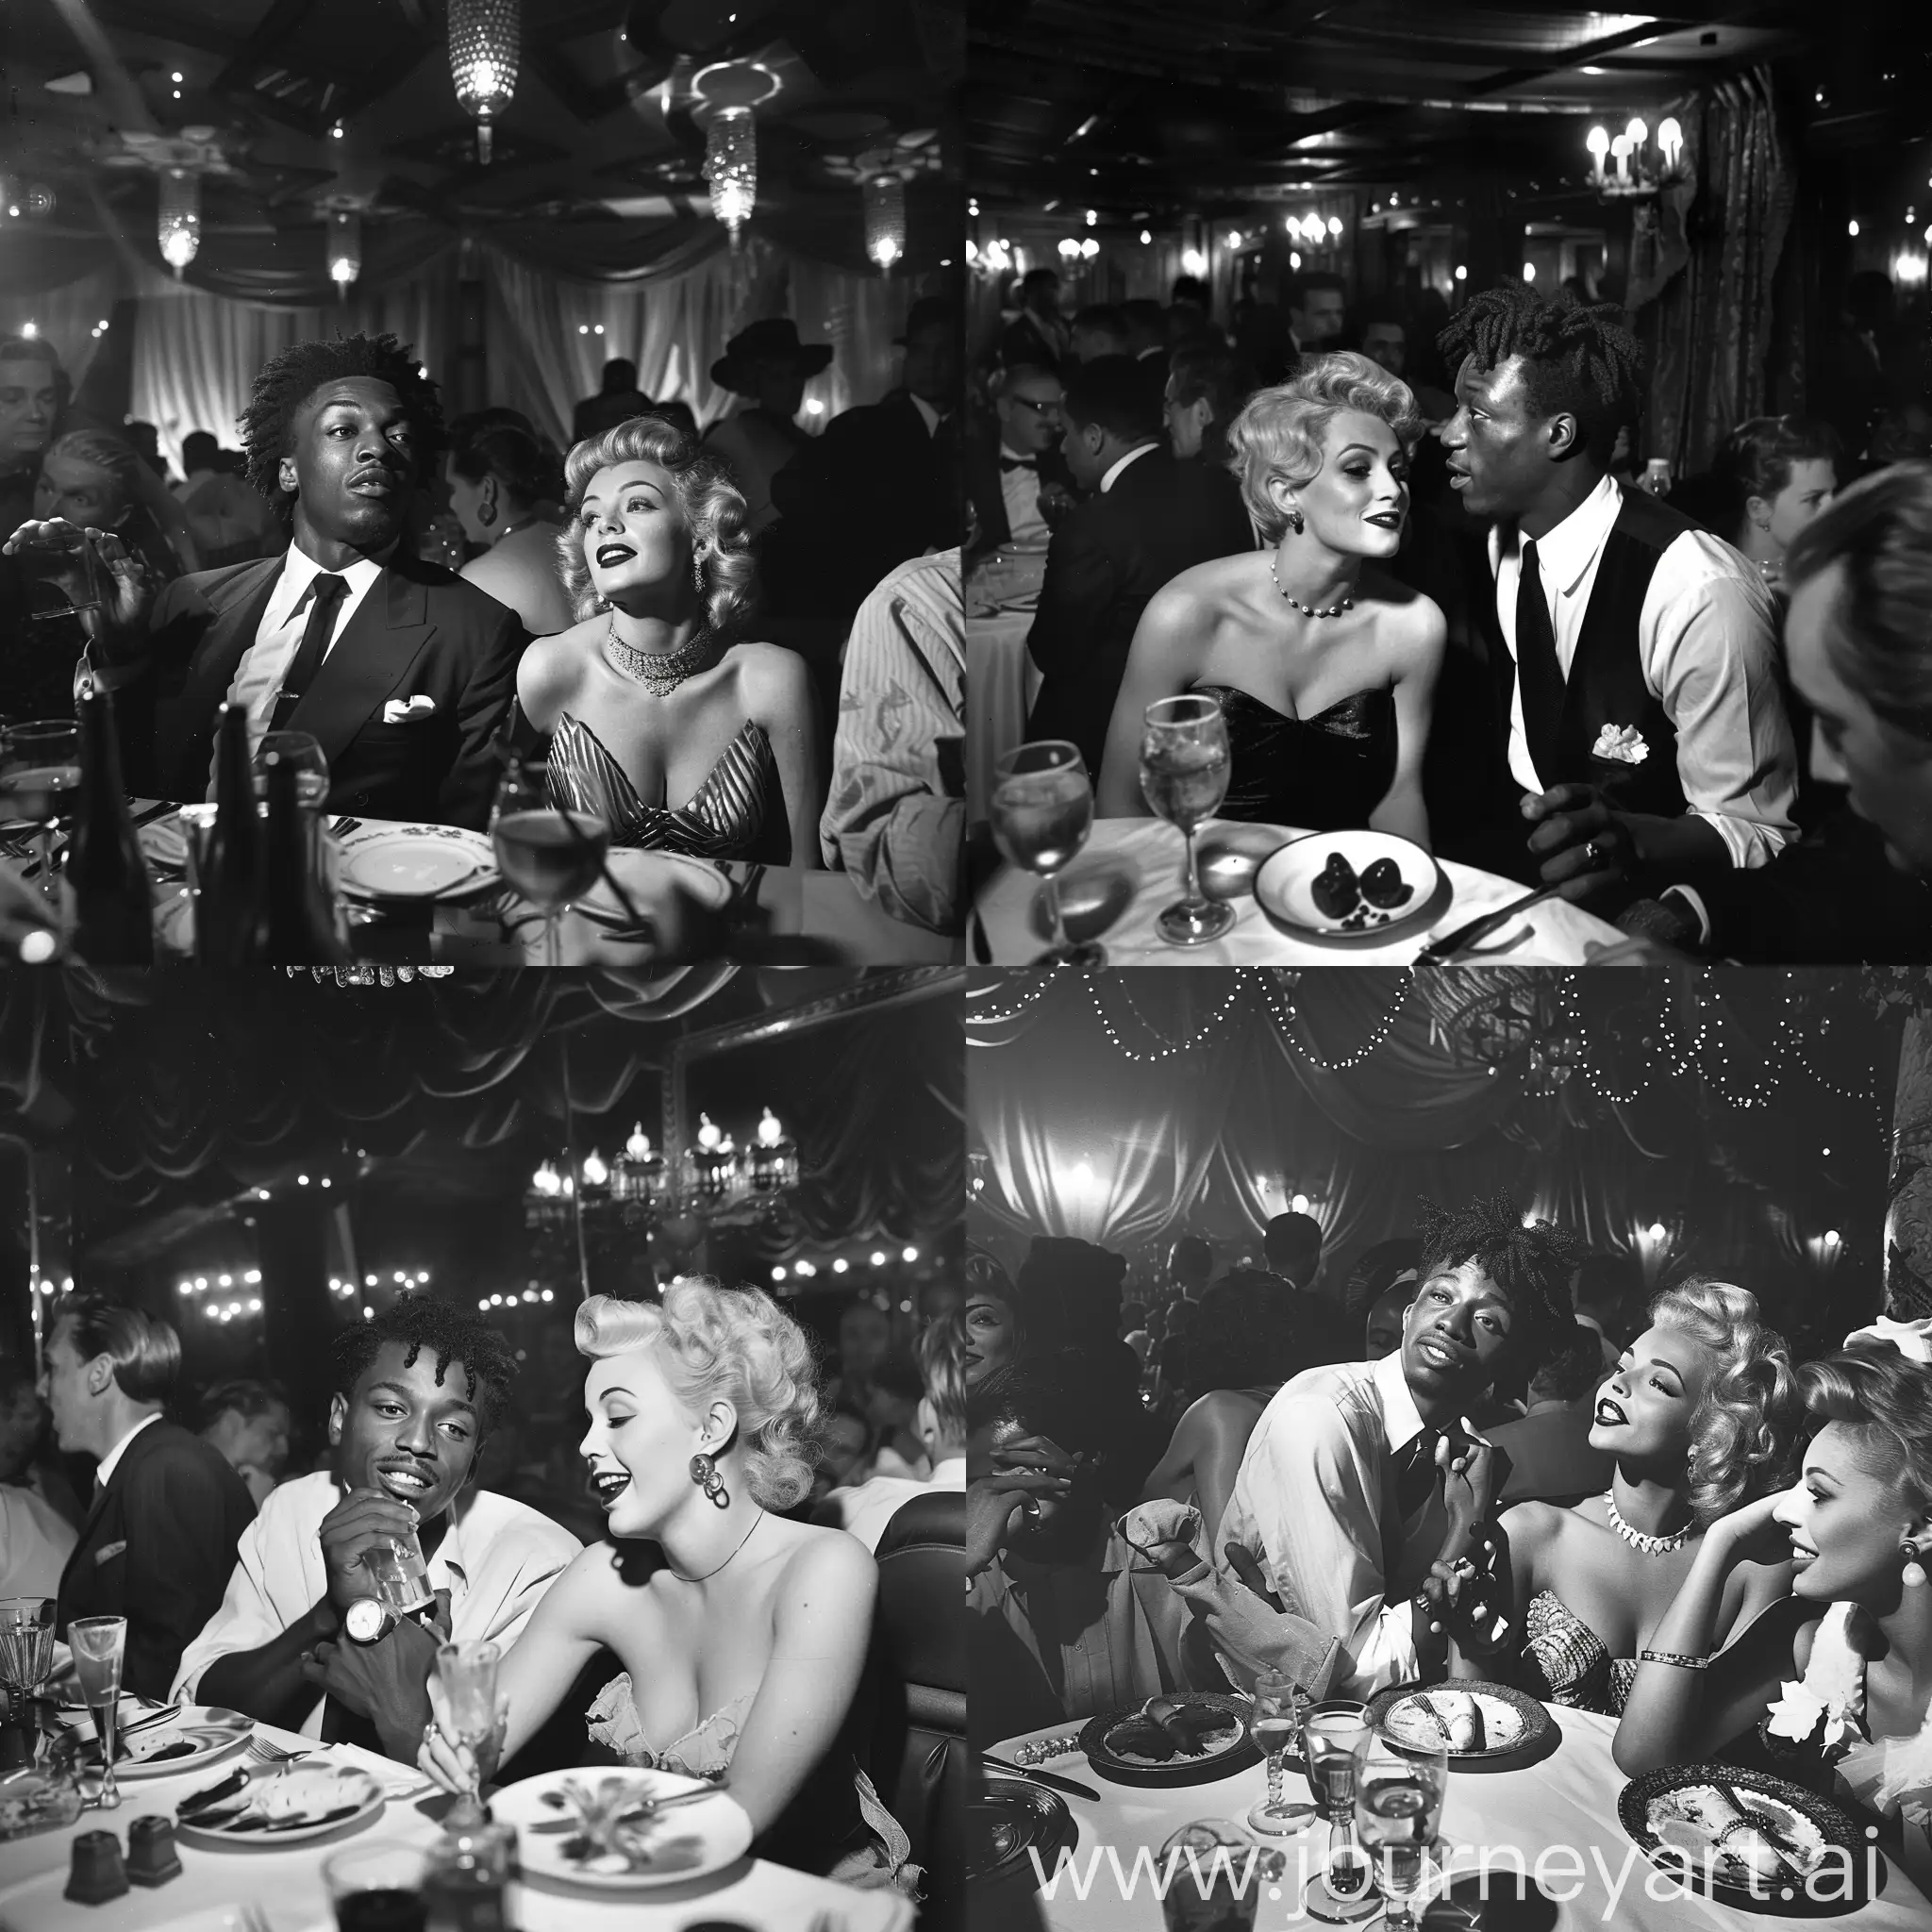 A 1960s Black and White Photograph,of Juice WRLD and Marilyn Monroe,at and fancy expensive restaurant with many people there.